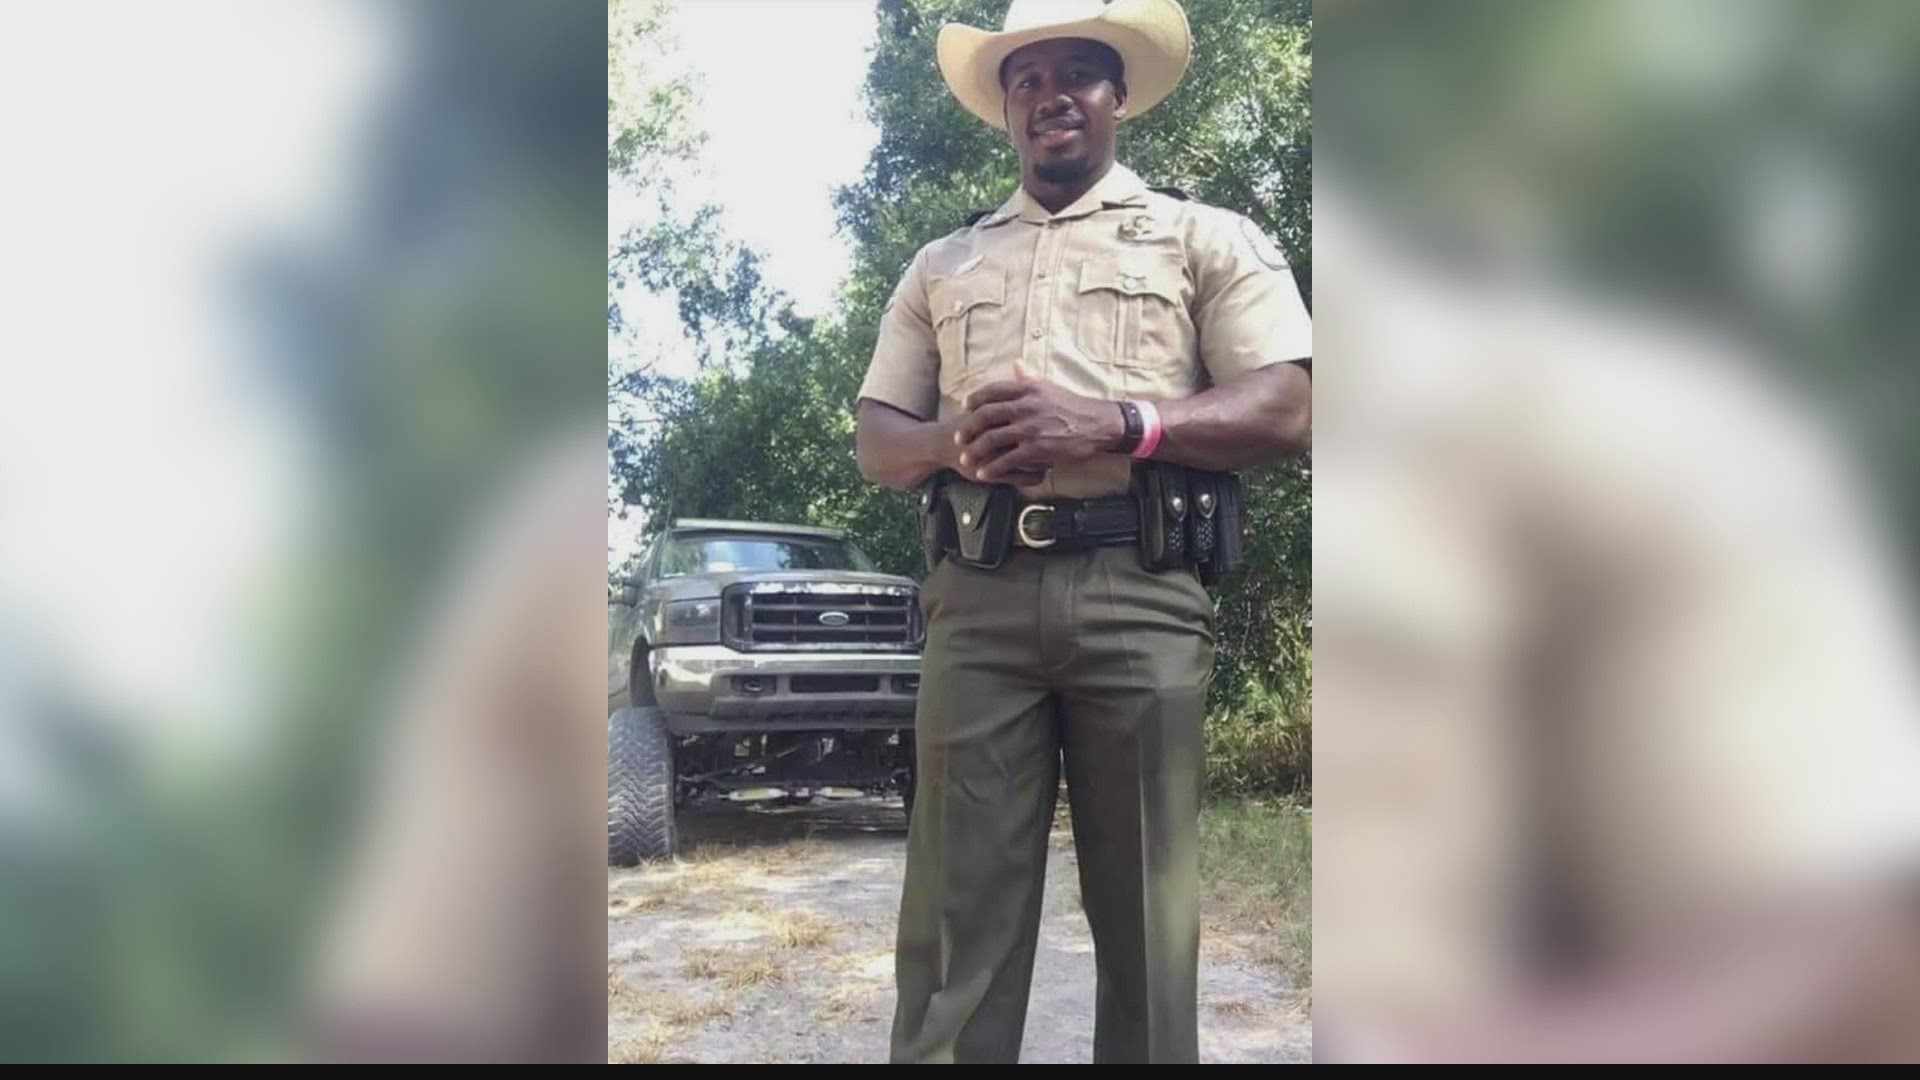 Off-duty Florida Fish and Wildlife Conservation Commission Officer Julian Keen, Jr. was shot and killed early this morning. He was 30 years old.